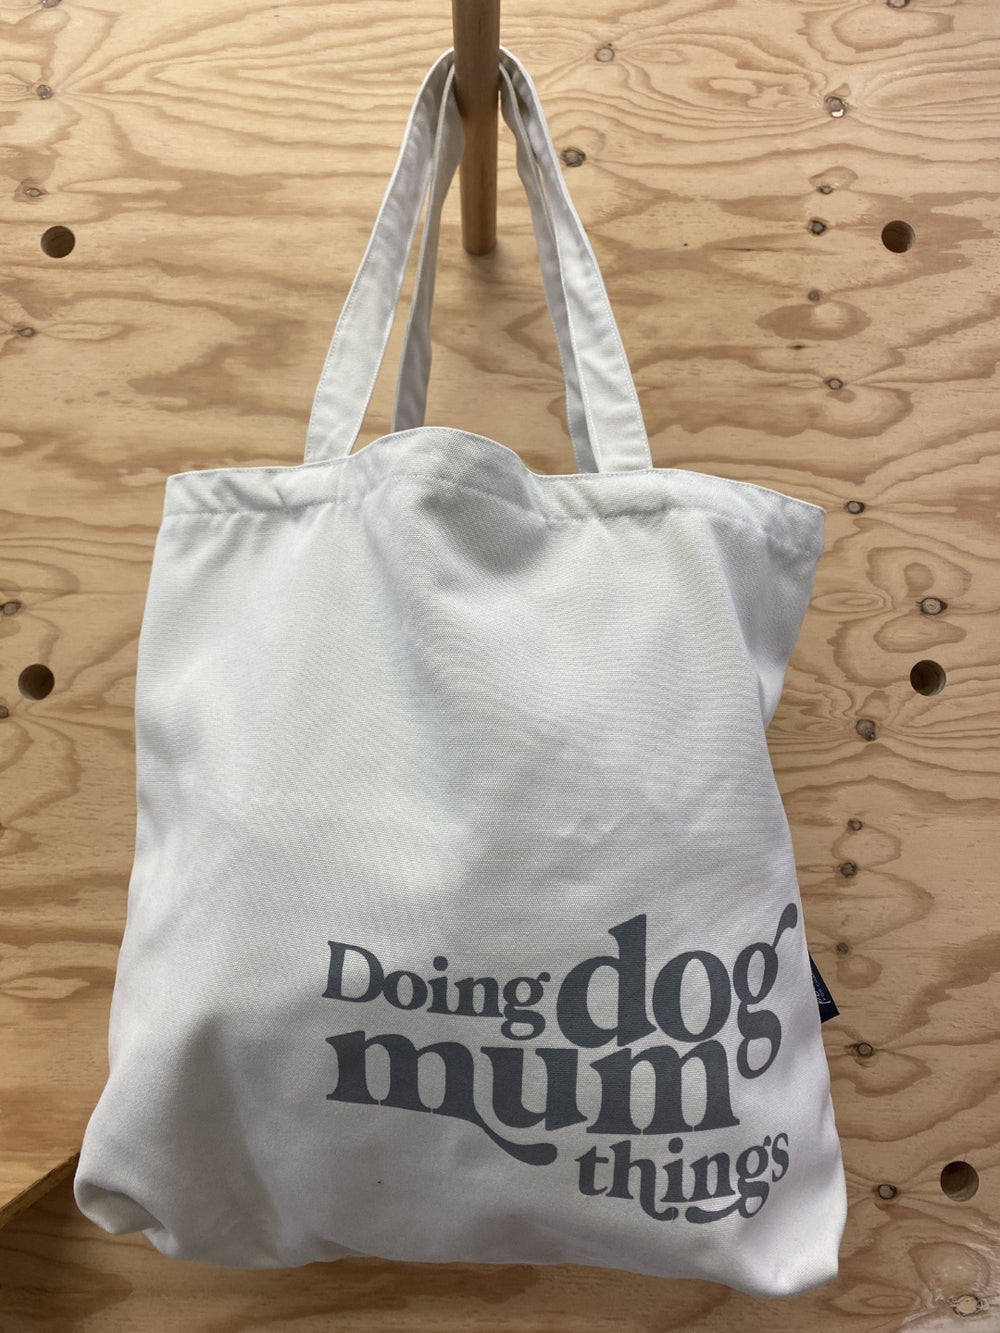 Doing Dog Mum Things Tote Bag from Paws for Change